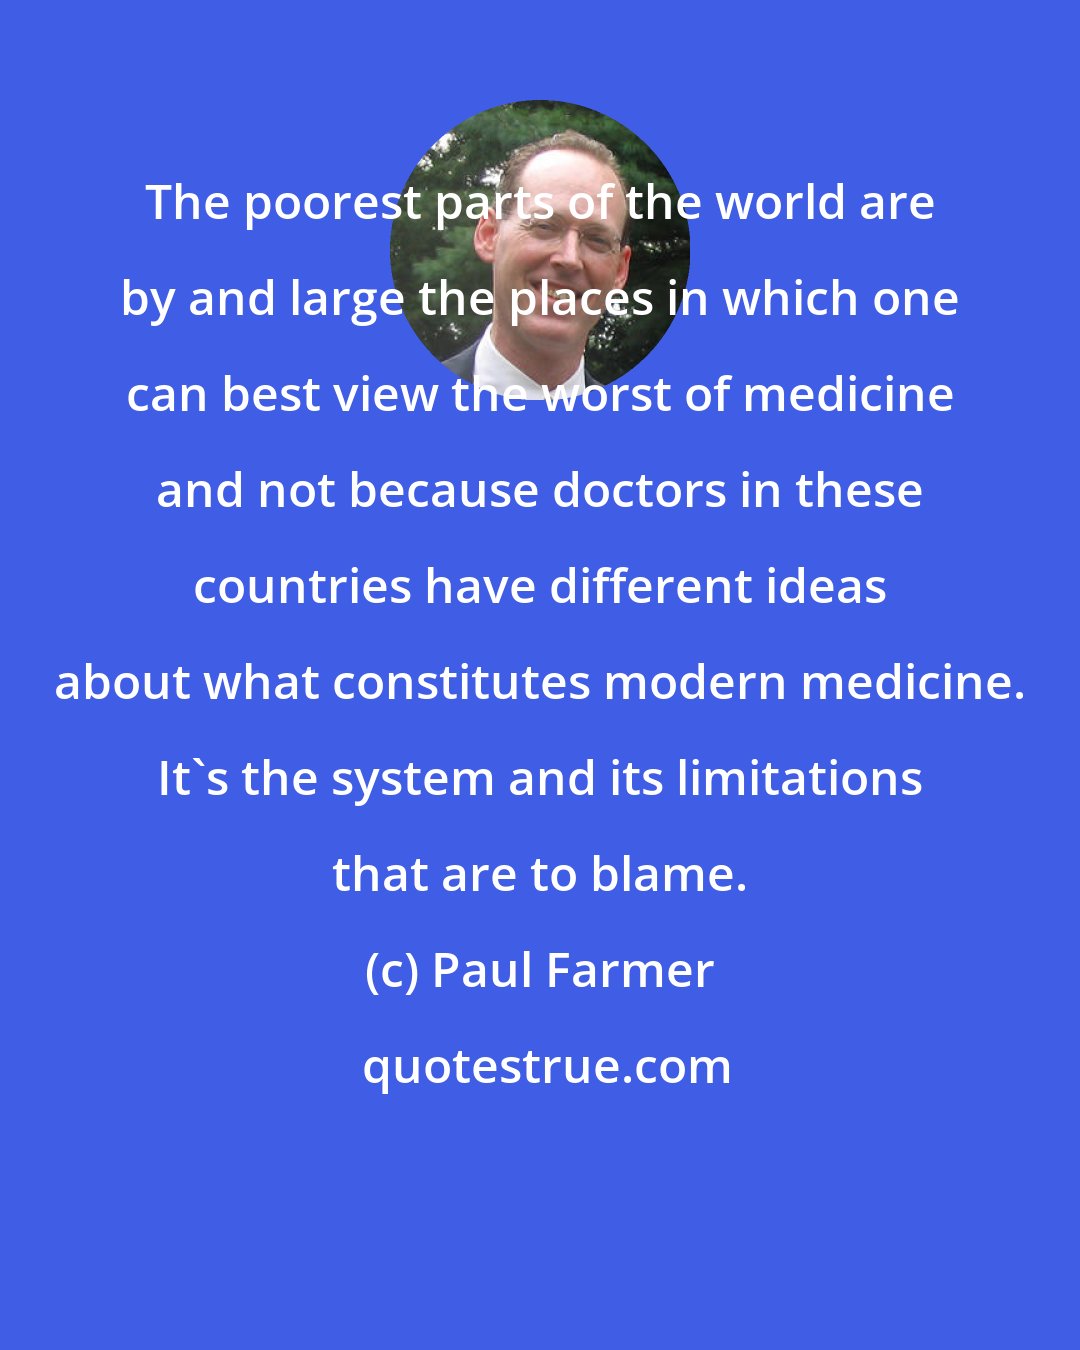 Paul Farmer: The poorest parts of the world are by and large the places in which one can best view the worst of medicine and not because doctors in these countries have different ideas about what constitutes modern medicine. It's the system and its limitations that are to blame.